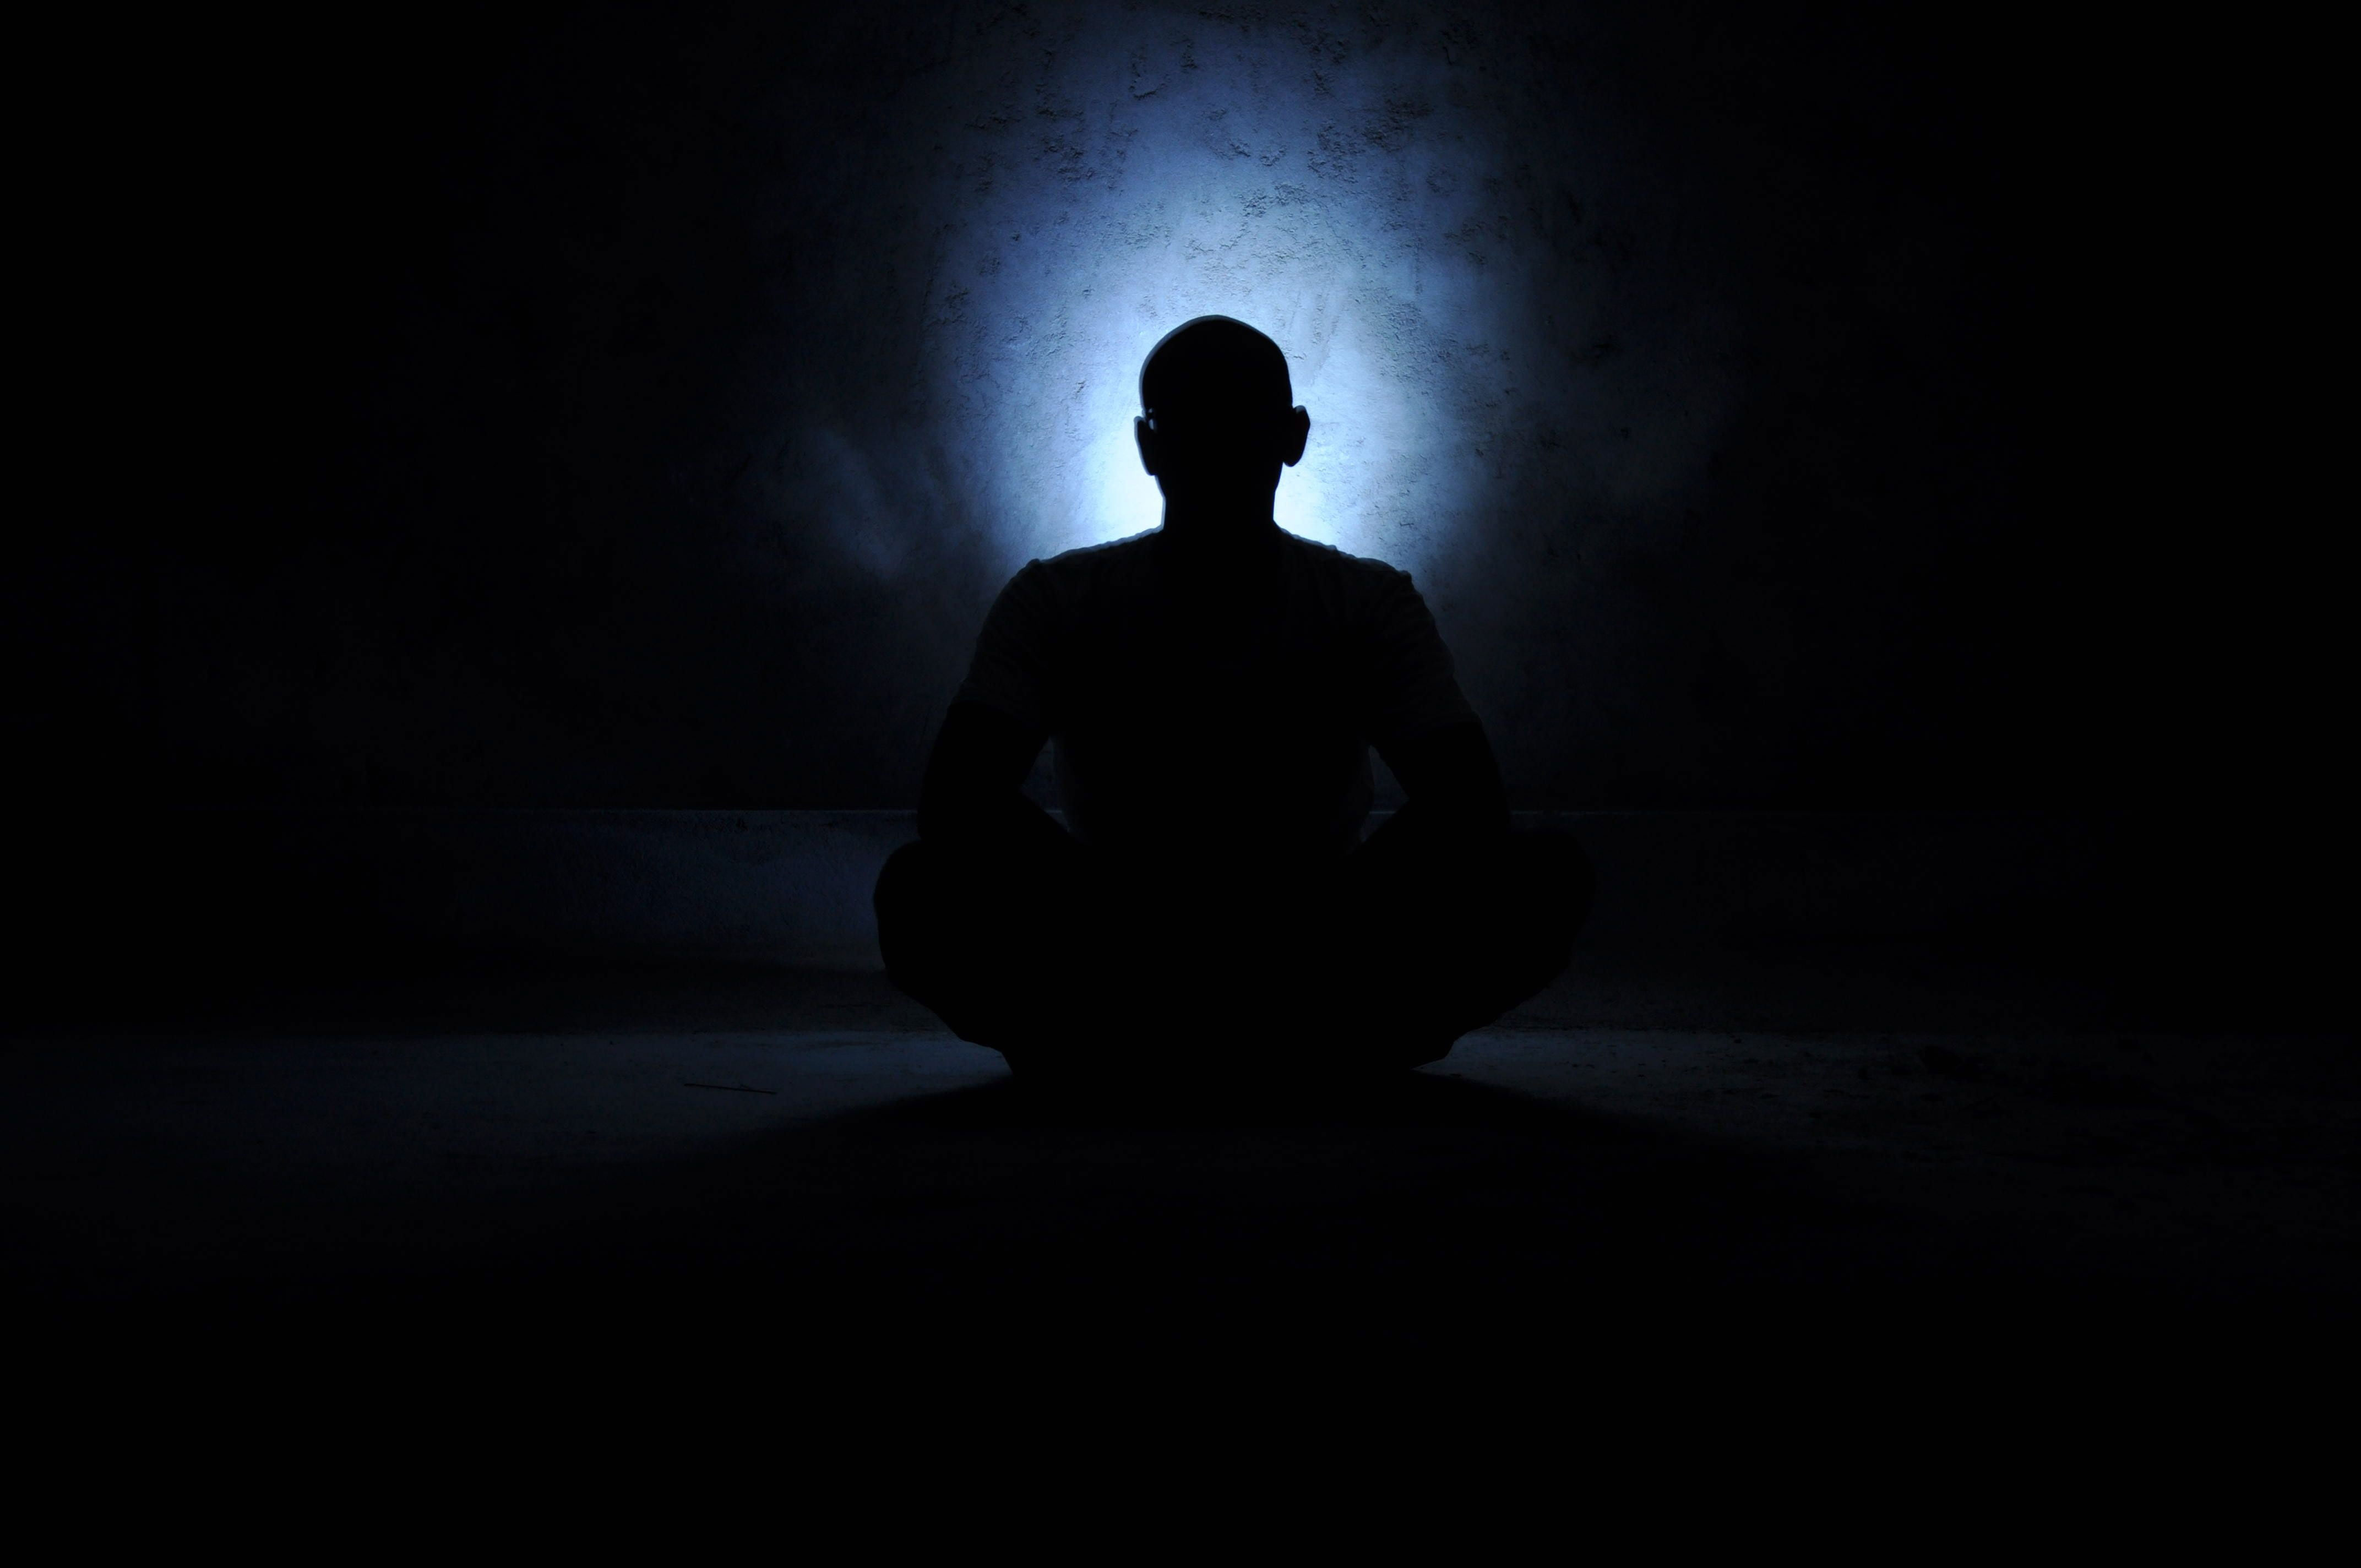 Wallpaper Silhouette Photography Of Person, Saint, Meditation, Dark, Other